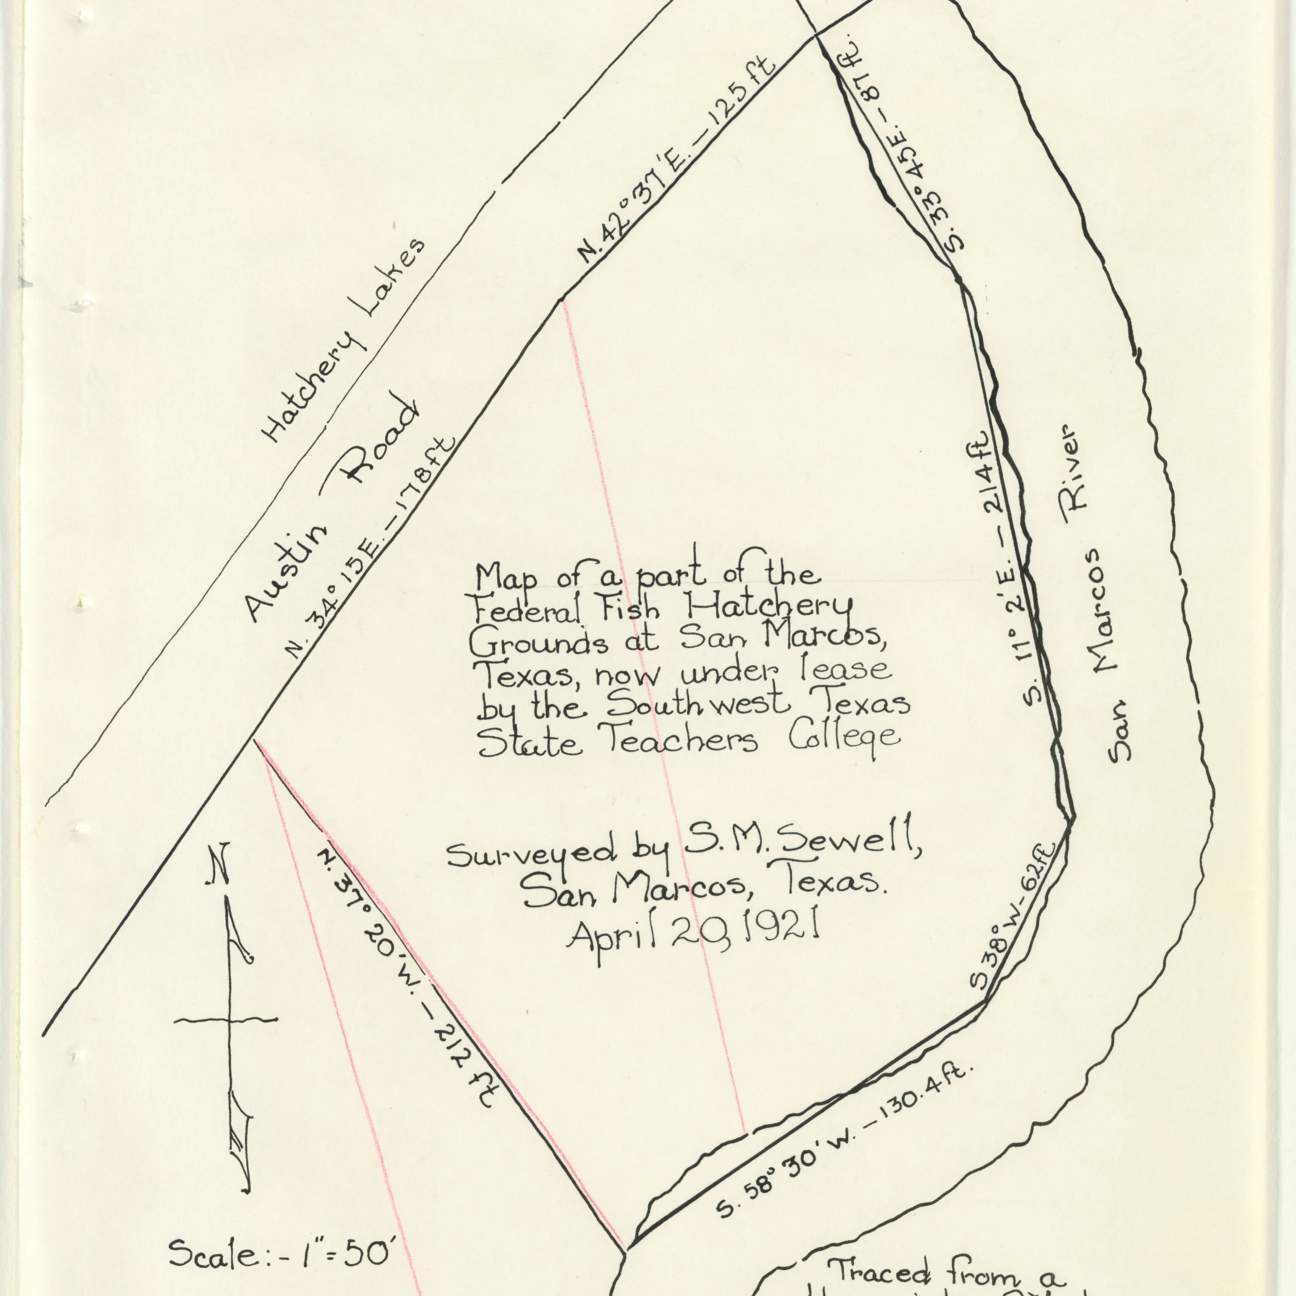 hand-drawn map of a part of the federal fish hatchery grounds in San Marcos in 1921